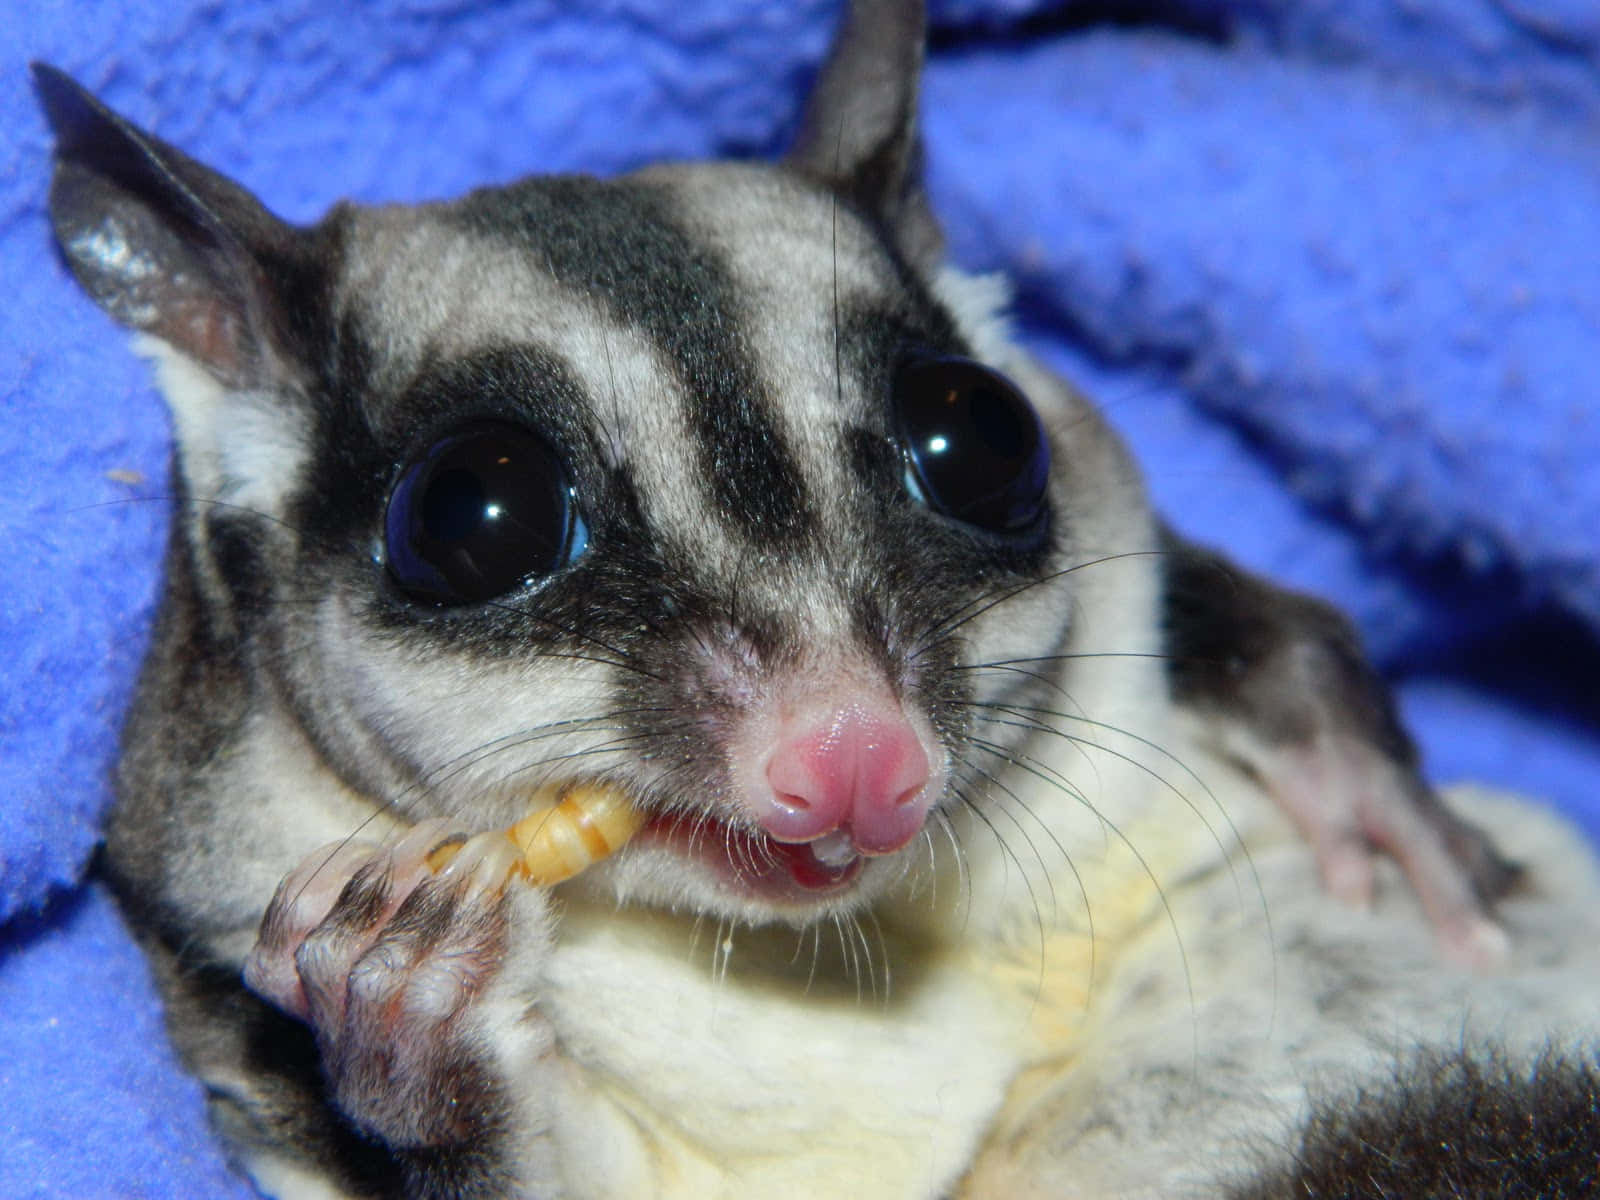 Welcome to The World of Sugar Gliders!